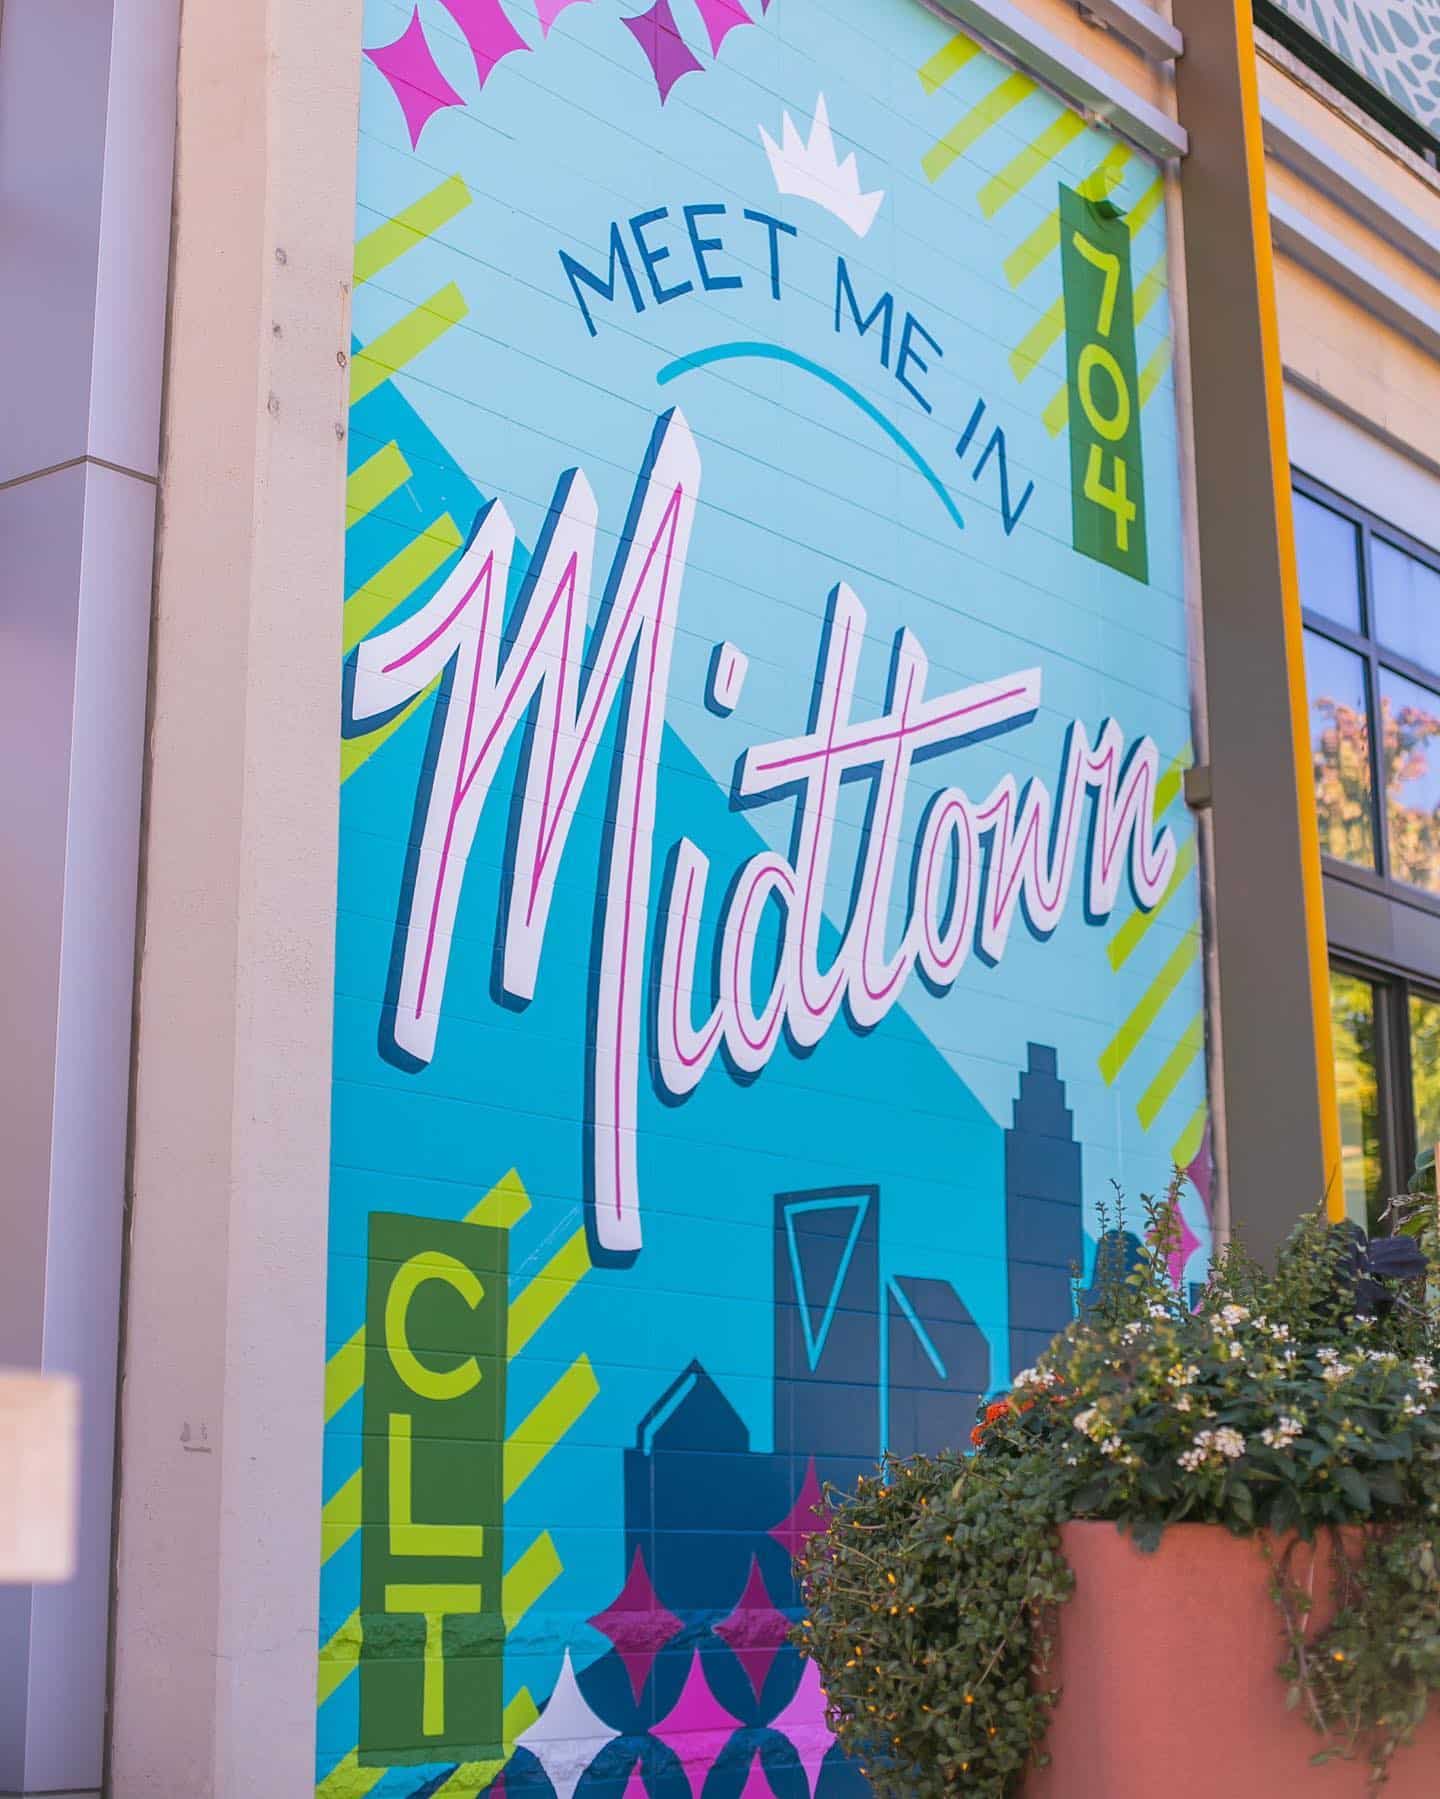 A gem by @amberthompson_art 

NEW MURAL: “Meet Me In Midtown is designed to reflect the vibrancy and history of the Midtown area. The bright color and the patterns sprinkled throughout represents the mixed-use nature of the community with its retail, residential, and office spaces. The typography was inspired by Mid-Century modern design - something prevalent during the era of the former Charlottetowne Mall that graced the same location” - Amber Thompson

Located across from Cava facing Charlottetown Avenue!